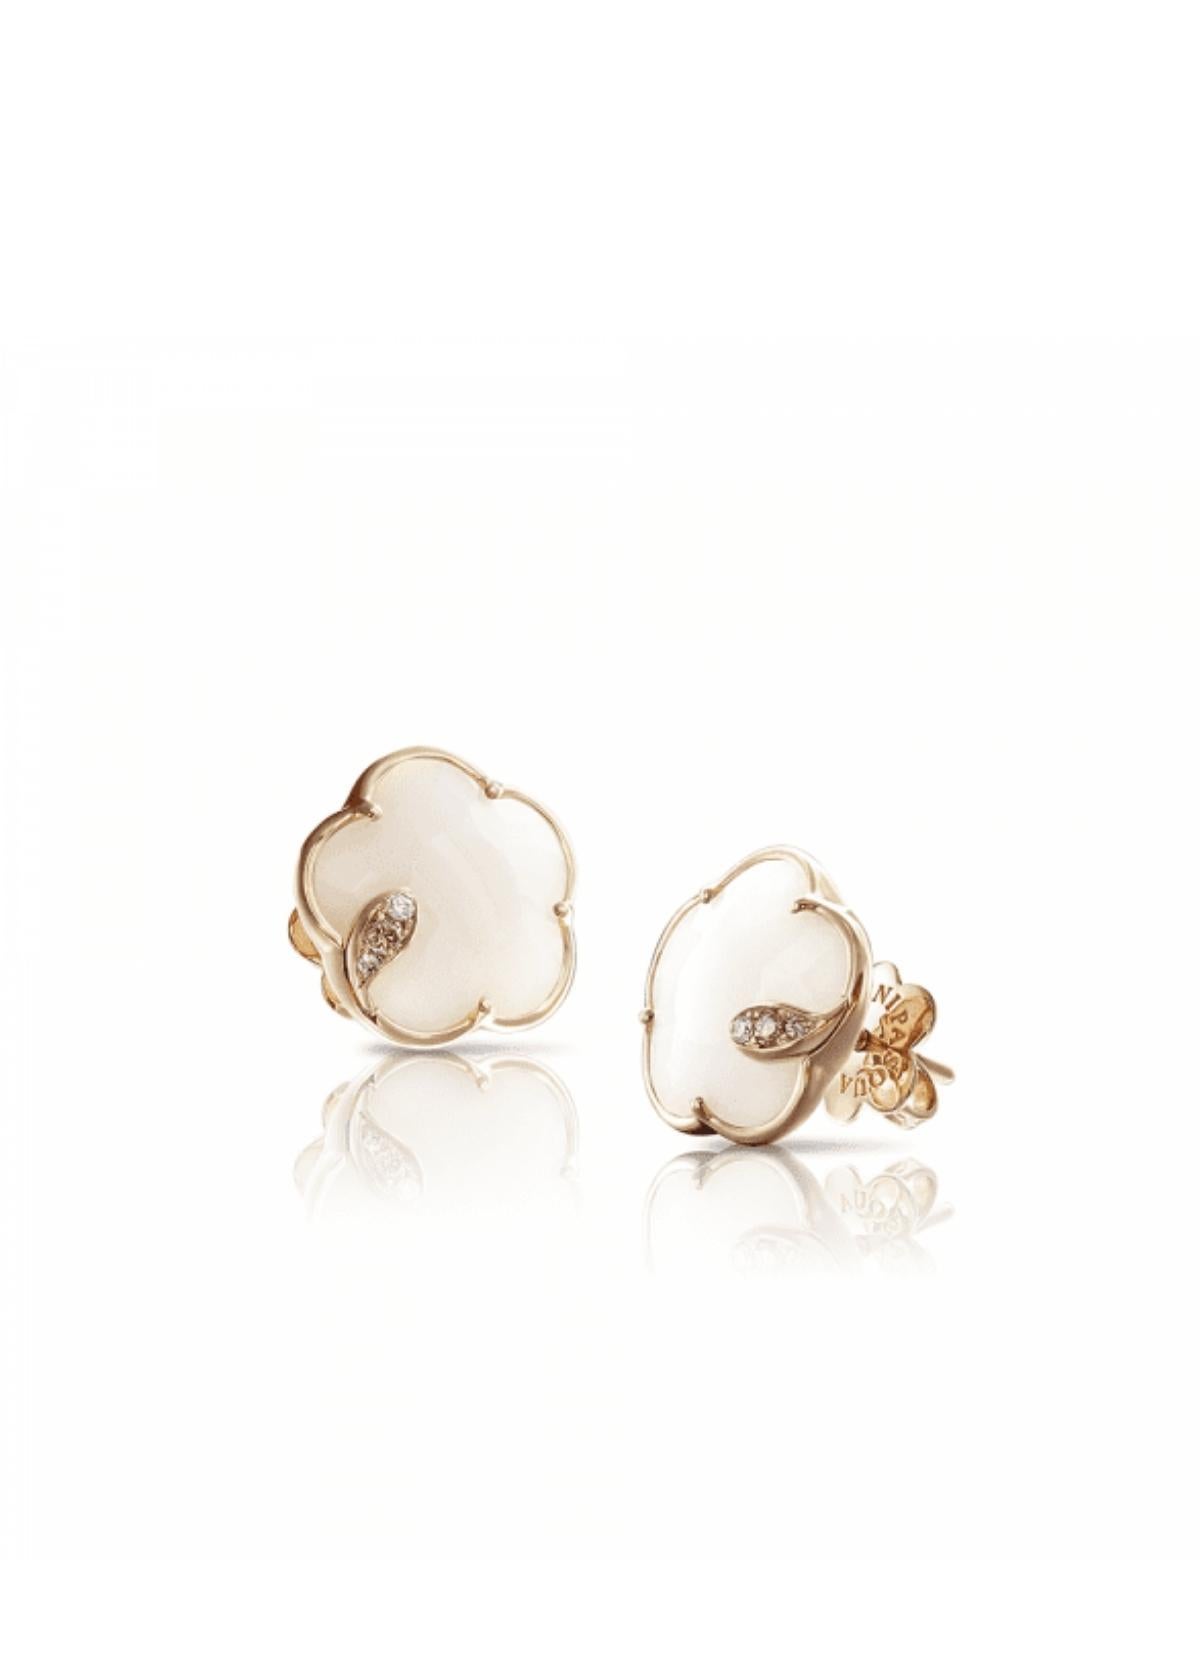 Petit Joli Earrings Earrings Rose Gold with White Agate and Diamonds 16131R In New Condition For Sale In PRAHA 1, CZ